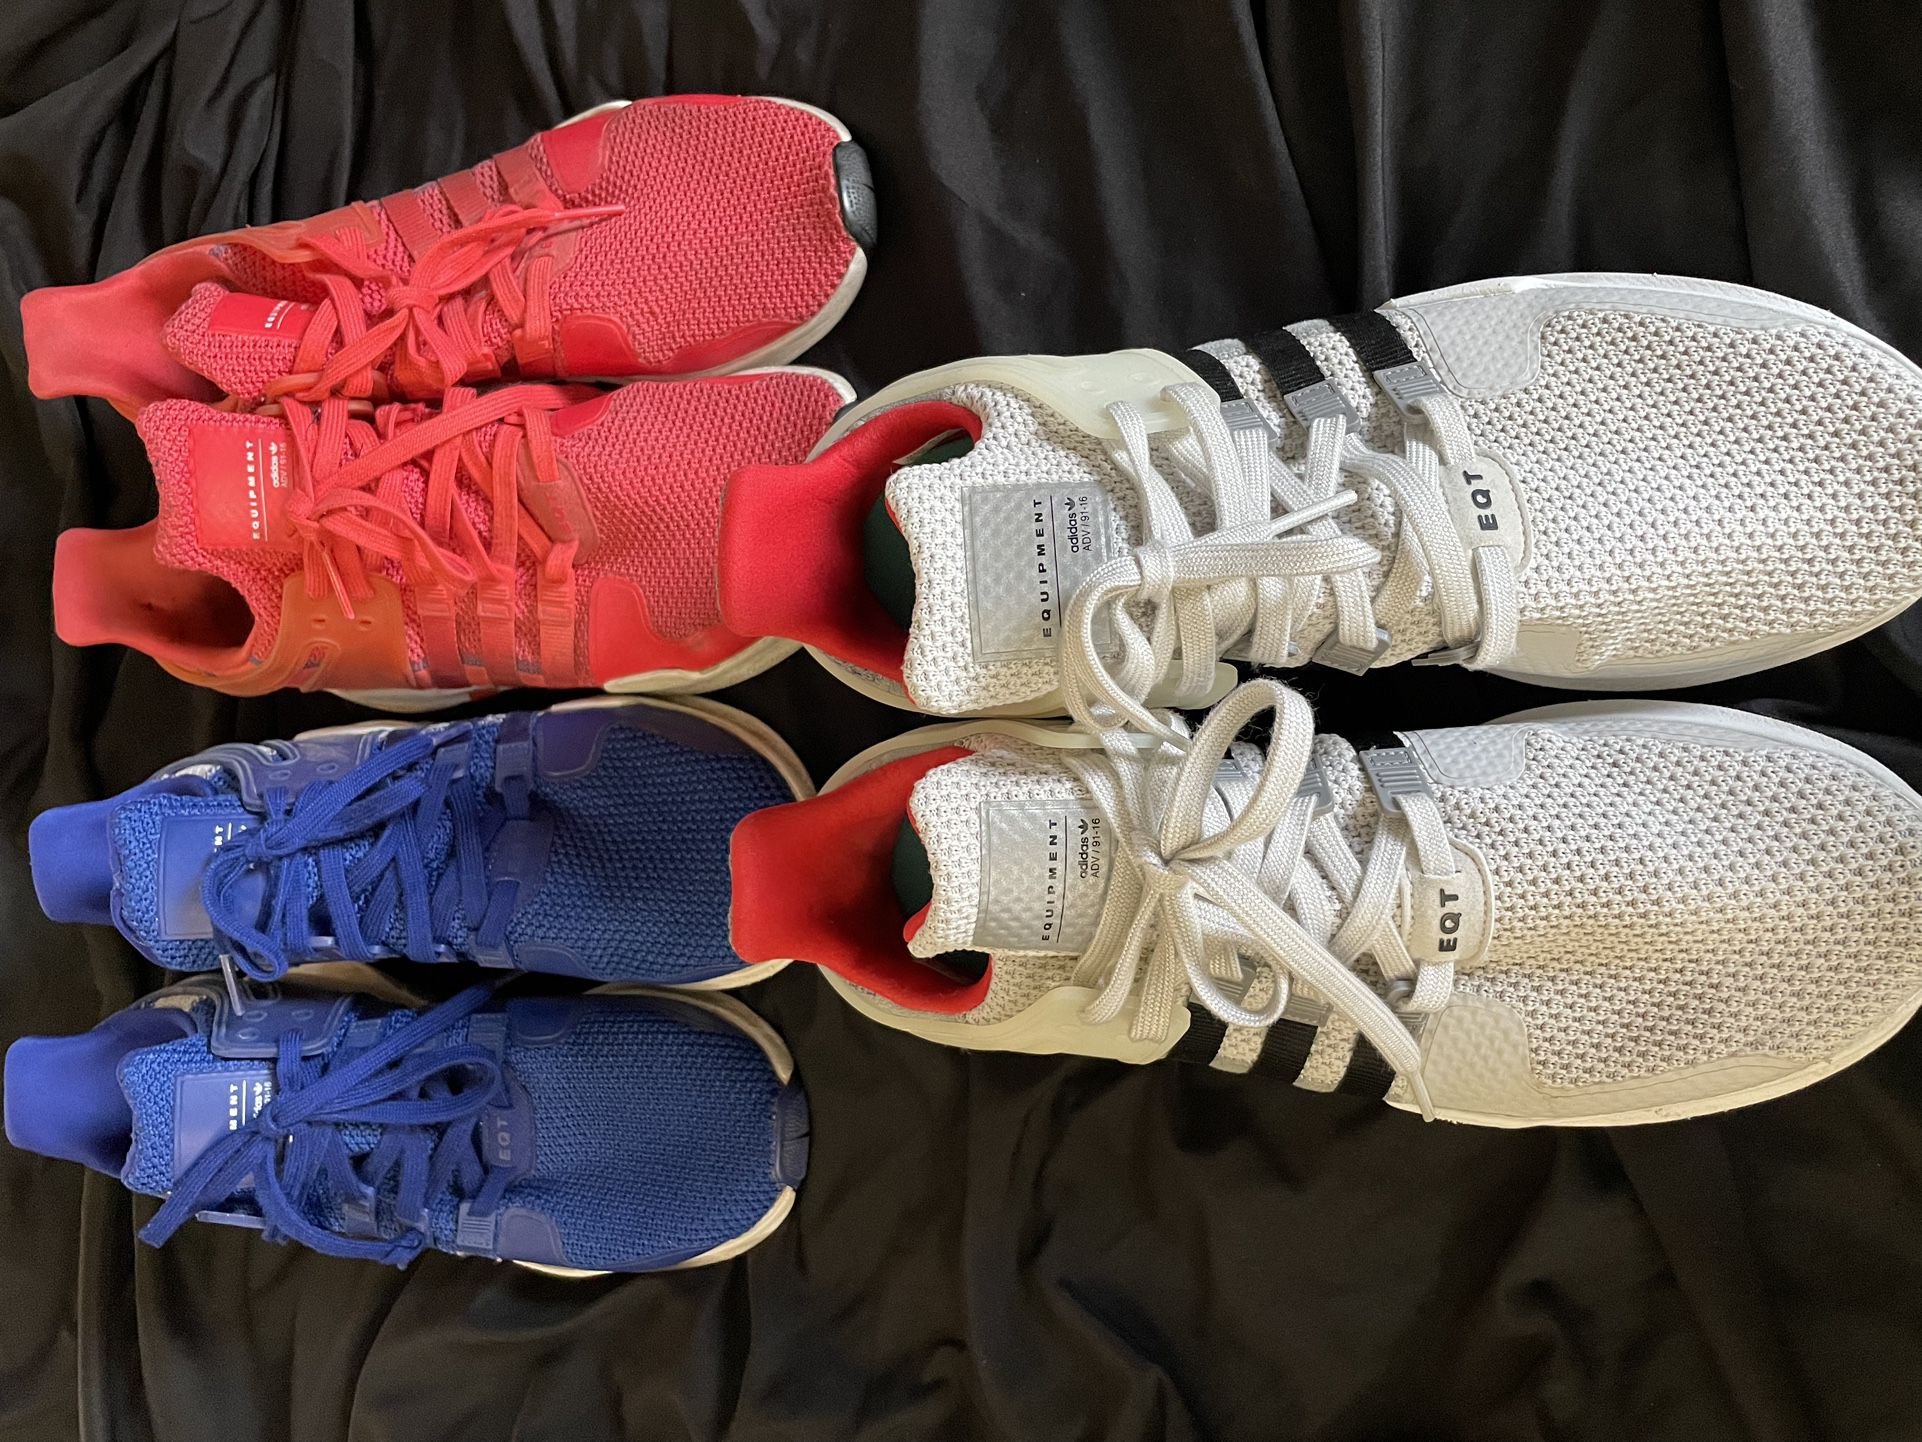 Adidas EQT (3 Pairs) Size 12 for Sale in Park, AZ -